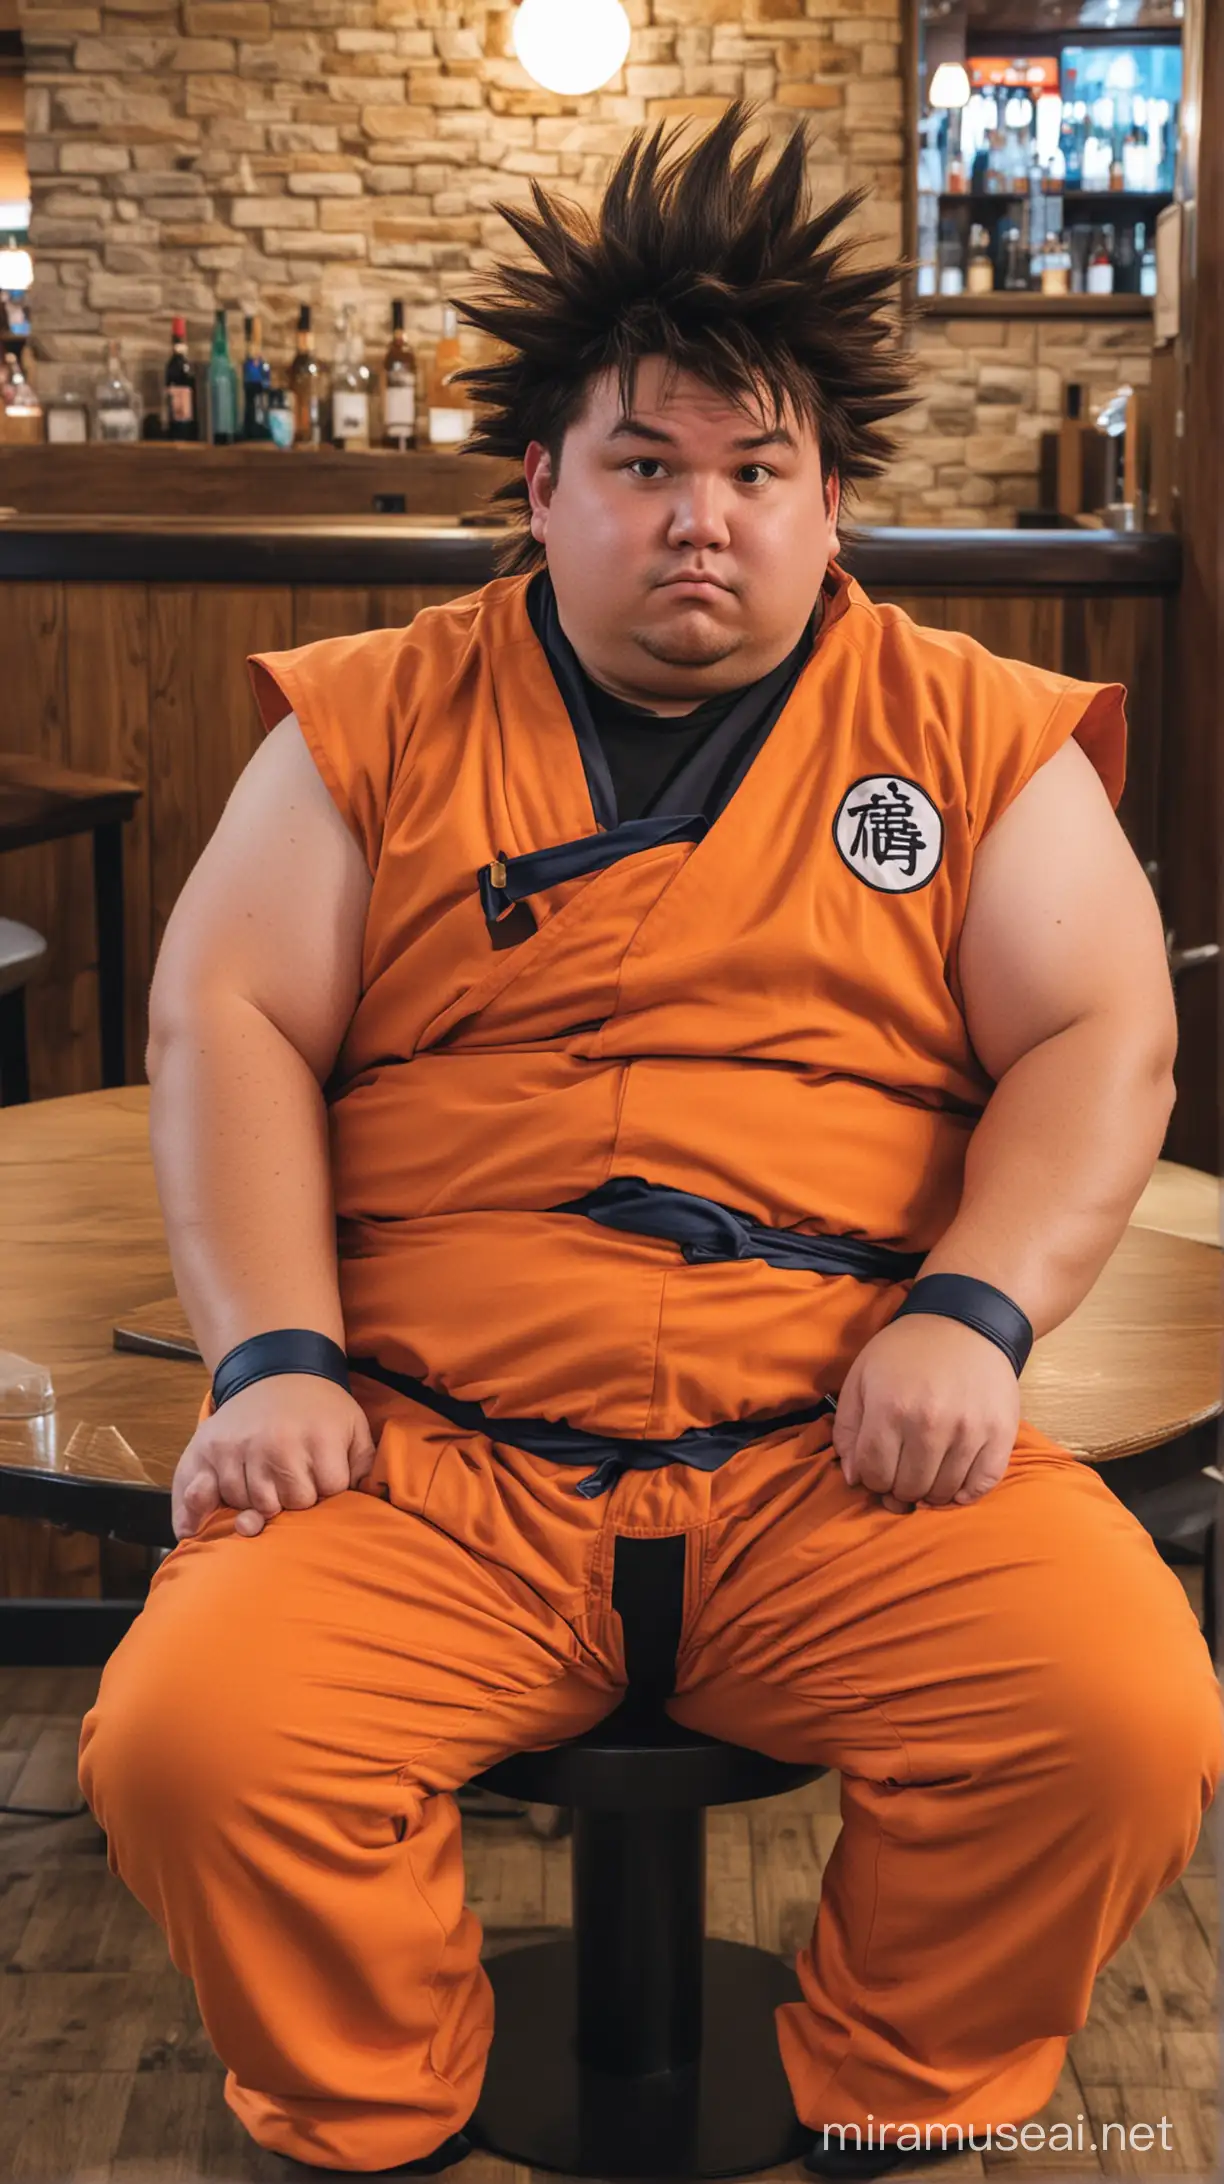 Cosplay Enthusiast in Goku Costume Enjoying Time at a Bar